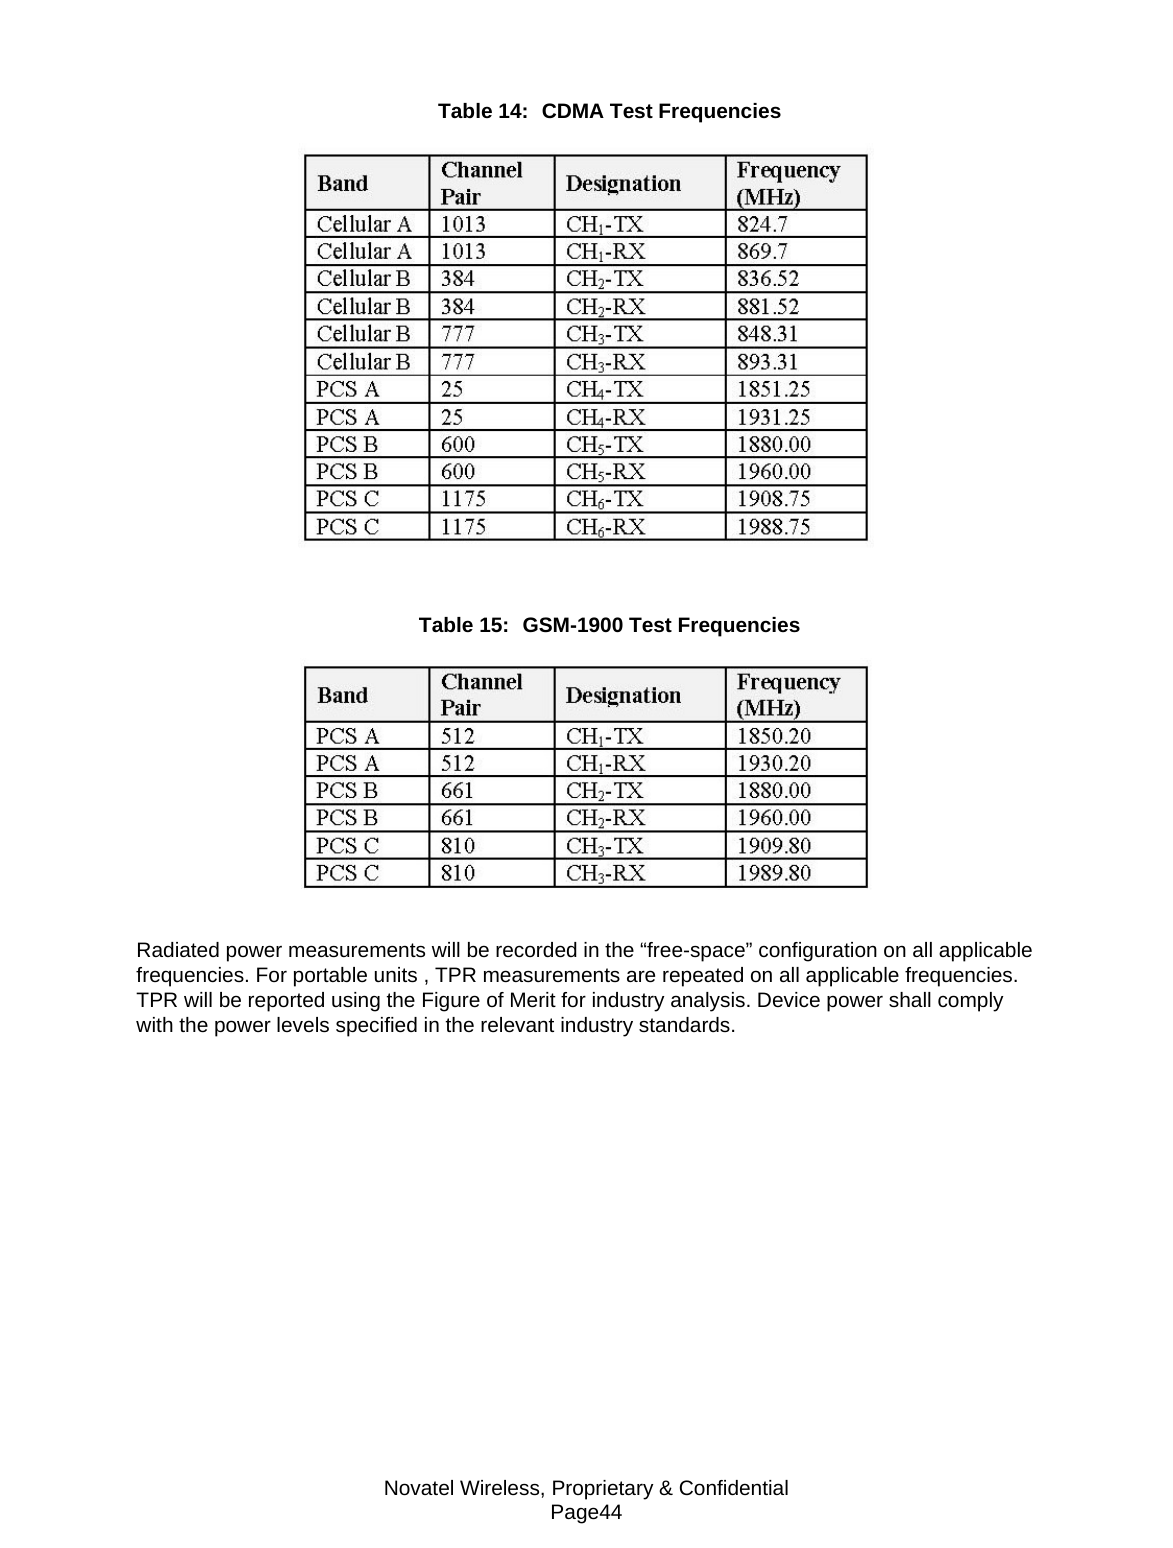 Novatel Wireless, Proprietary &amp; Confidential Page44 Table 14:  CDMA Test Frequencies   Table 15:  GSM-1900 Test Frequencies    Radiated power measurements will be recorded in the “free-space” configuration on all applicable frequencies. For portable units , TPR measurements are repeated on all applicable frequencies. TPR will be reported using the Figure of Merit for industry analysis. Device power shall comply with the power levels specified in the relevant industry standards.  